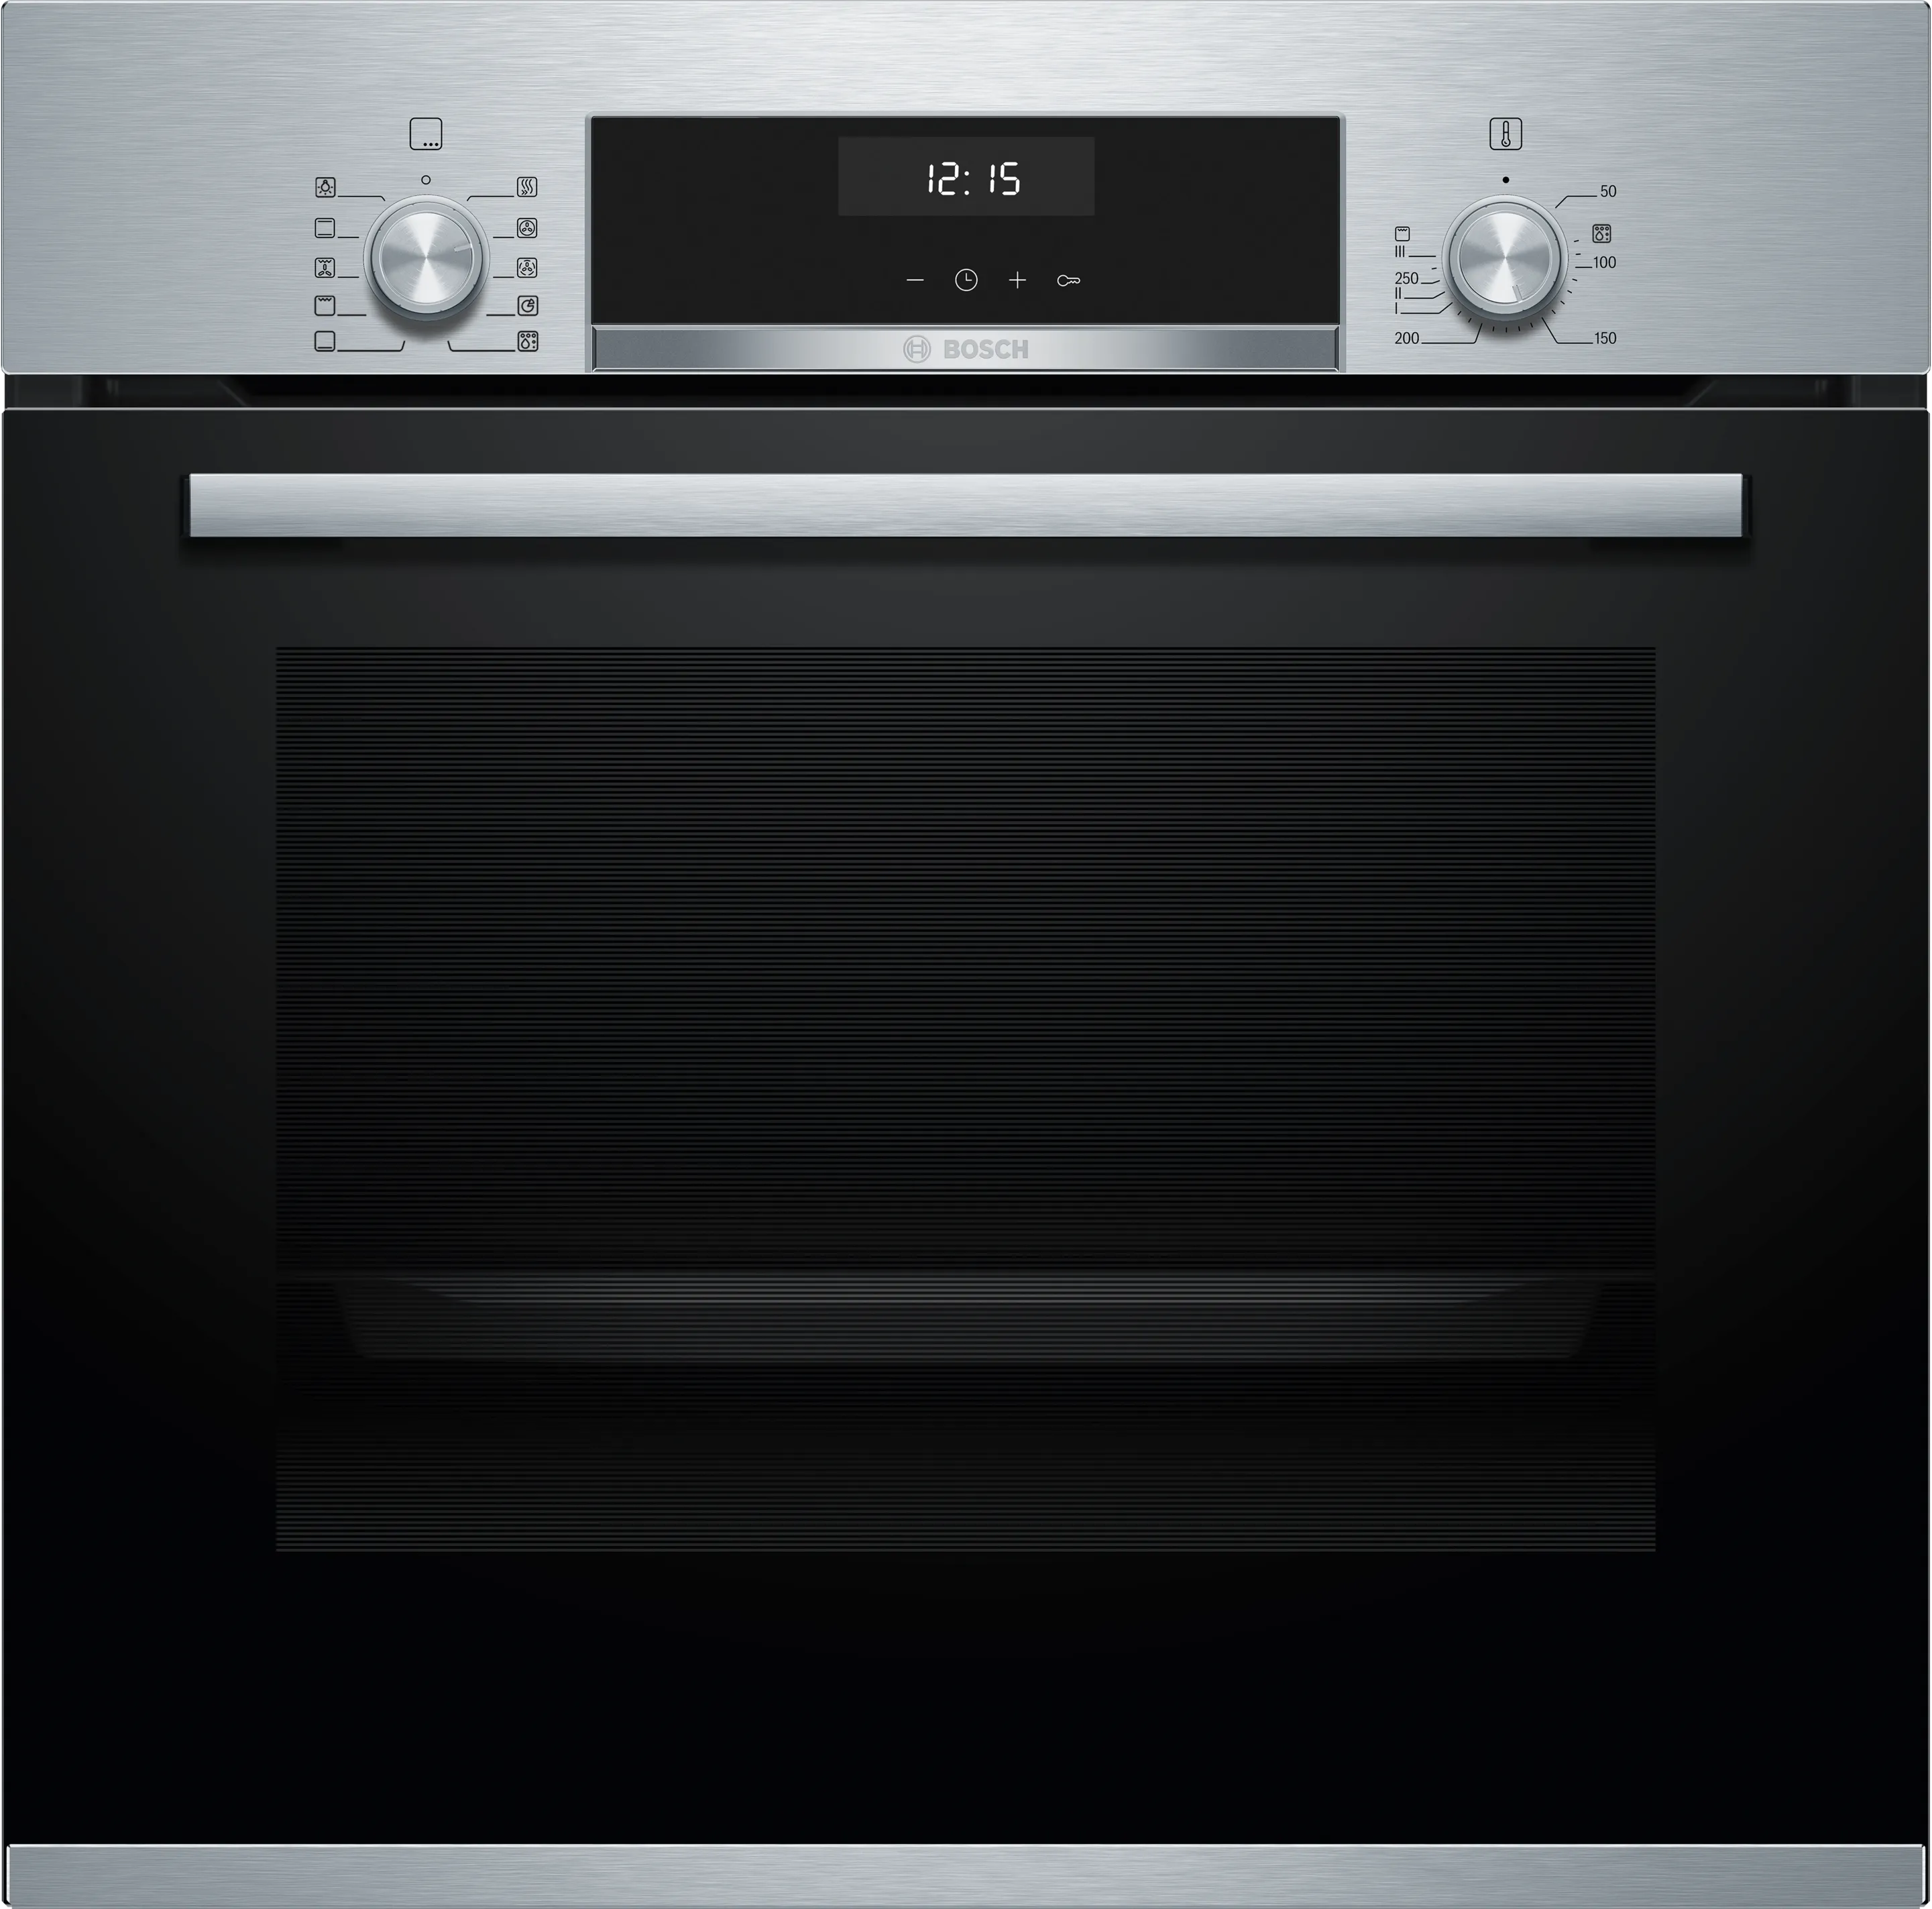 Series 4 built-in oven 60 x 60 cm Stainless steel 